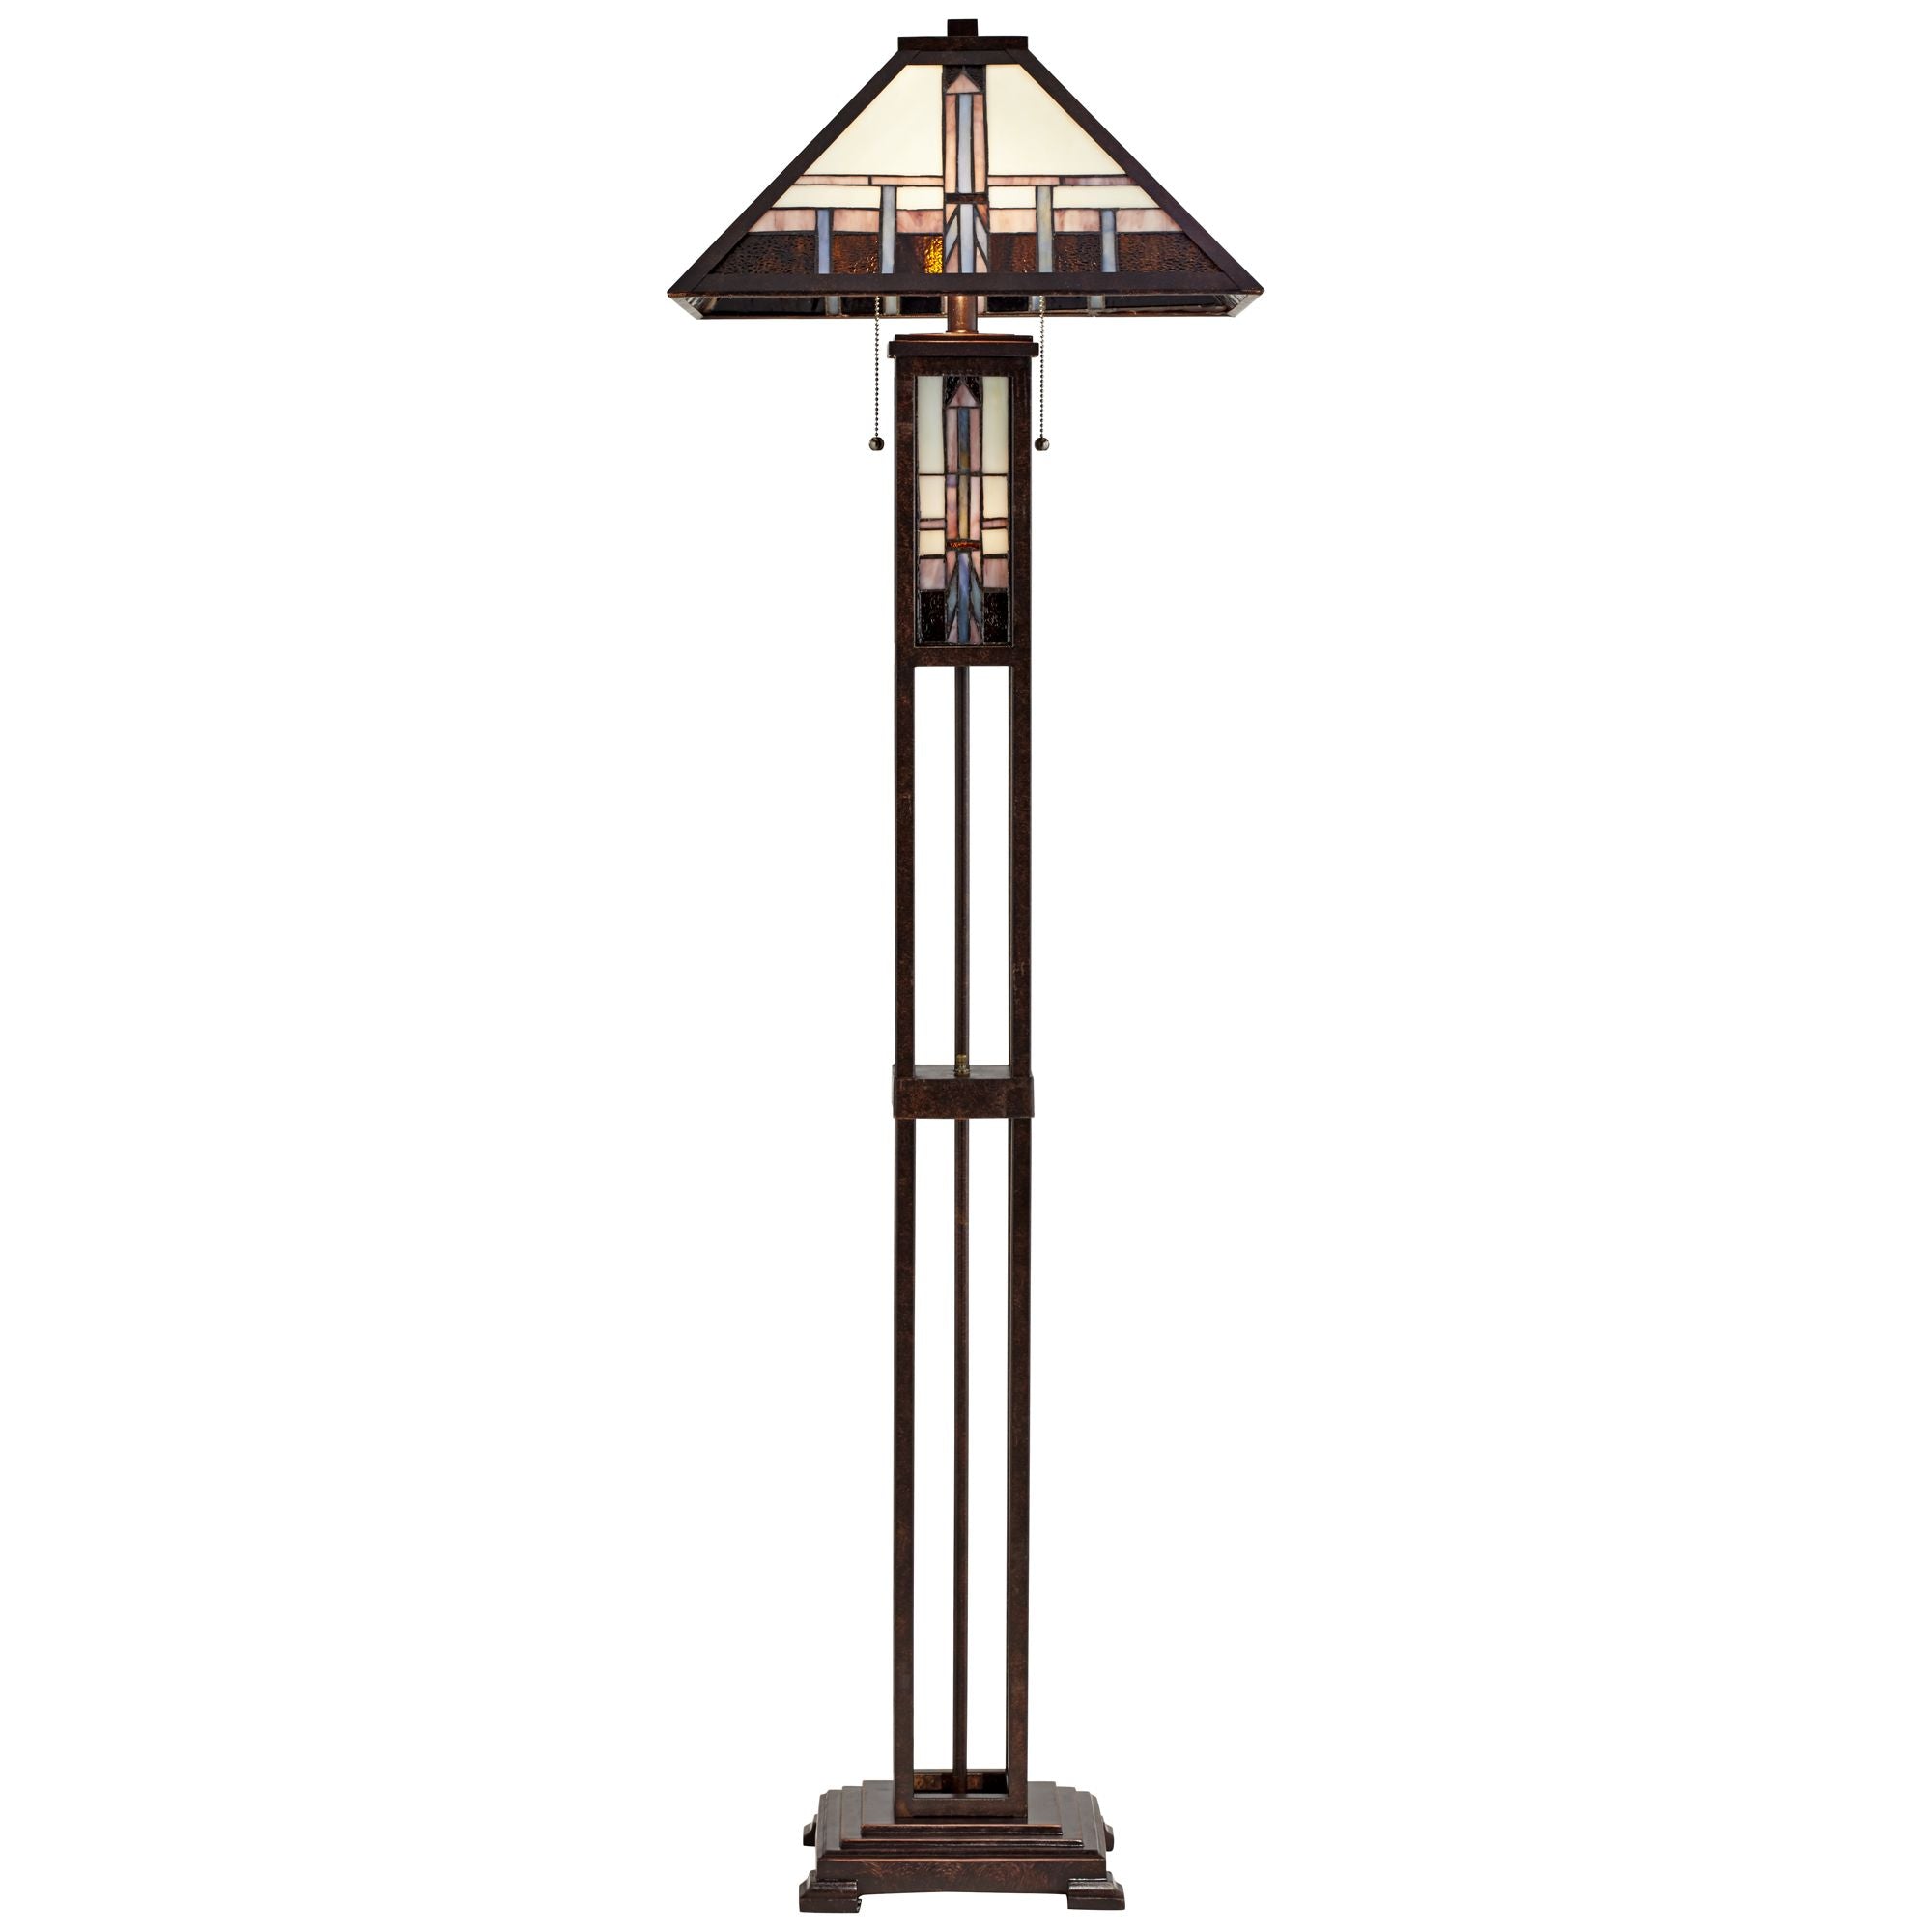 Robert Louis  Mission Floor Lamp Art Deco with Nightlight 60.5" Tall Oiled Bronze Stained Glass Shade for Living Room Reading Bedroom